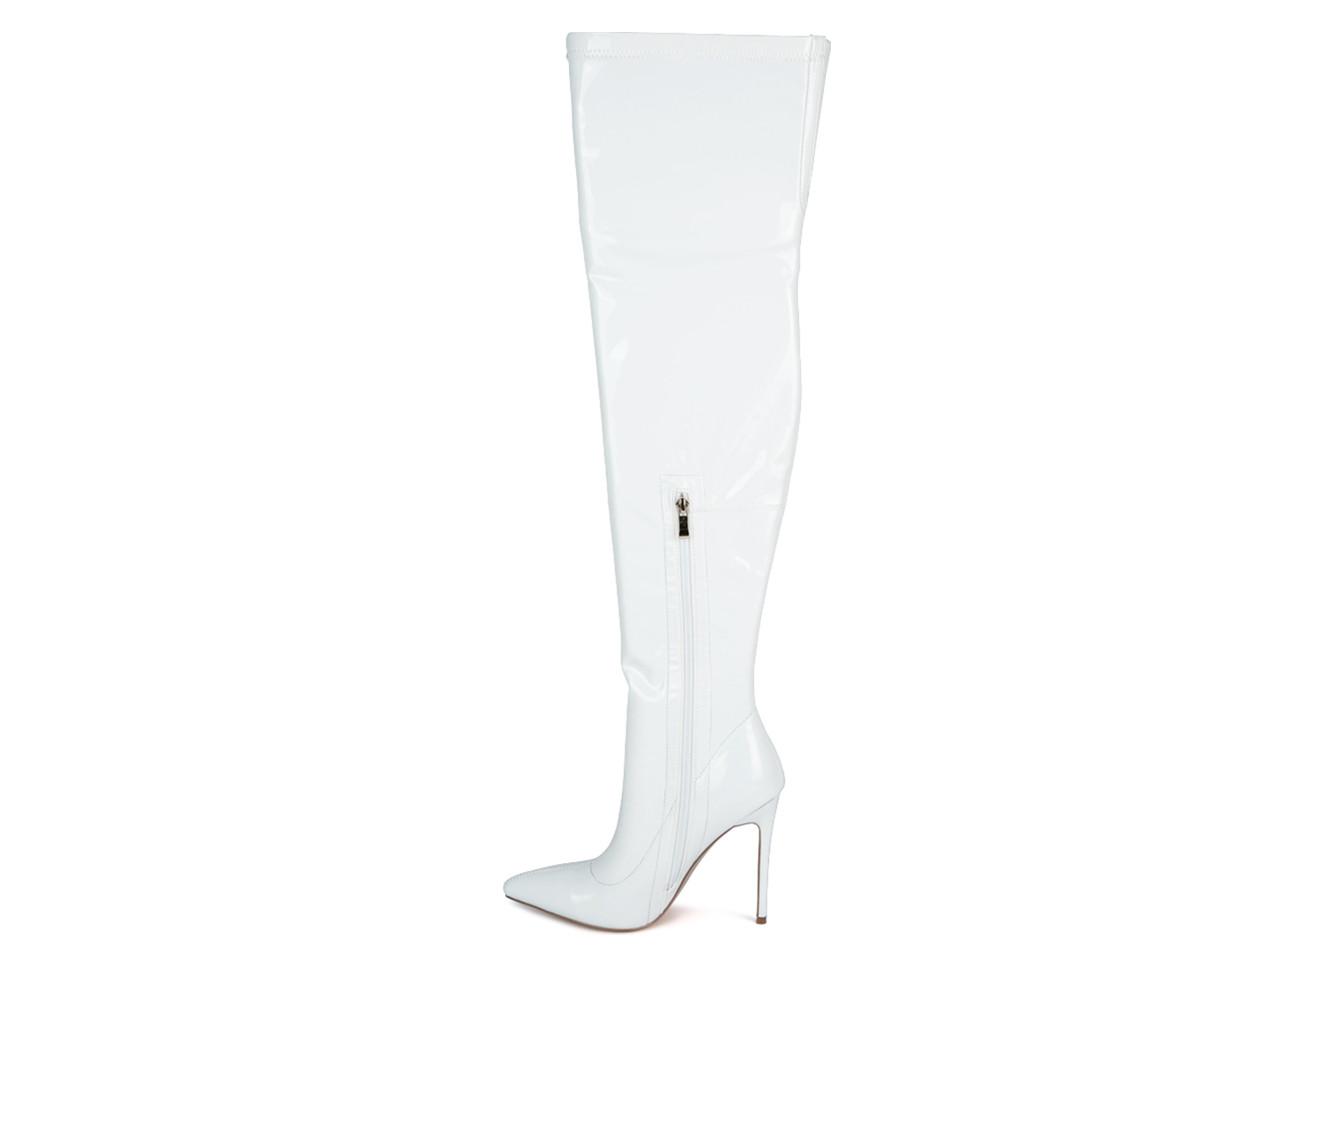 Women's London Rag Riggle Over The Knee Stiletto Boots